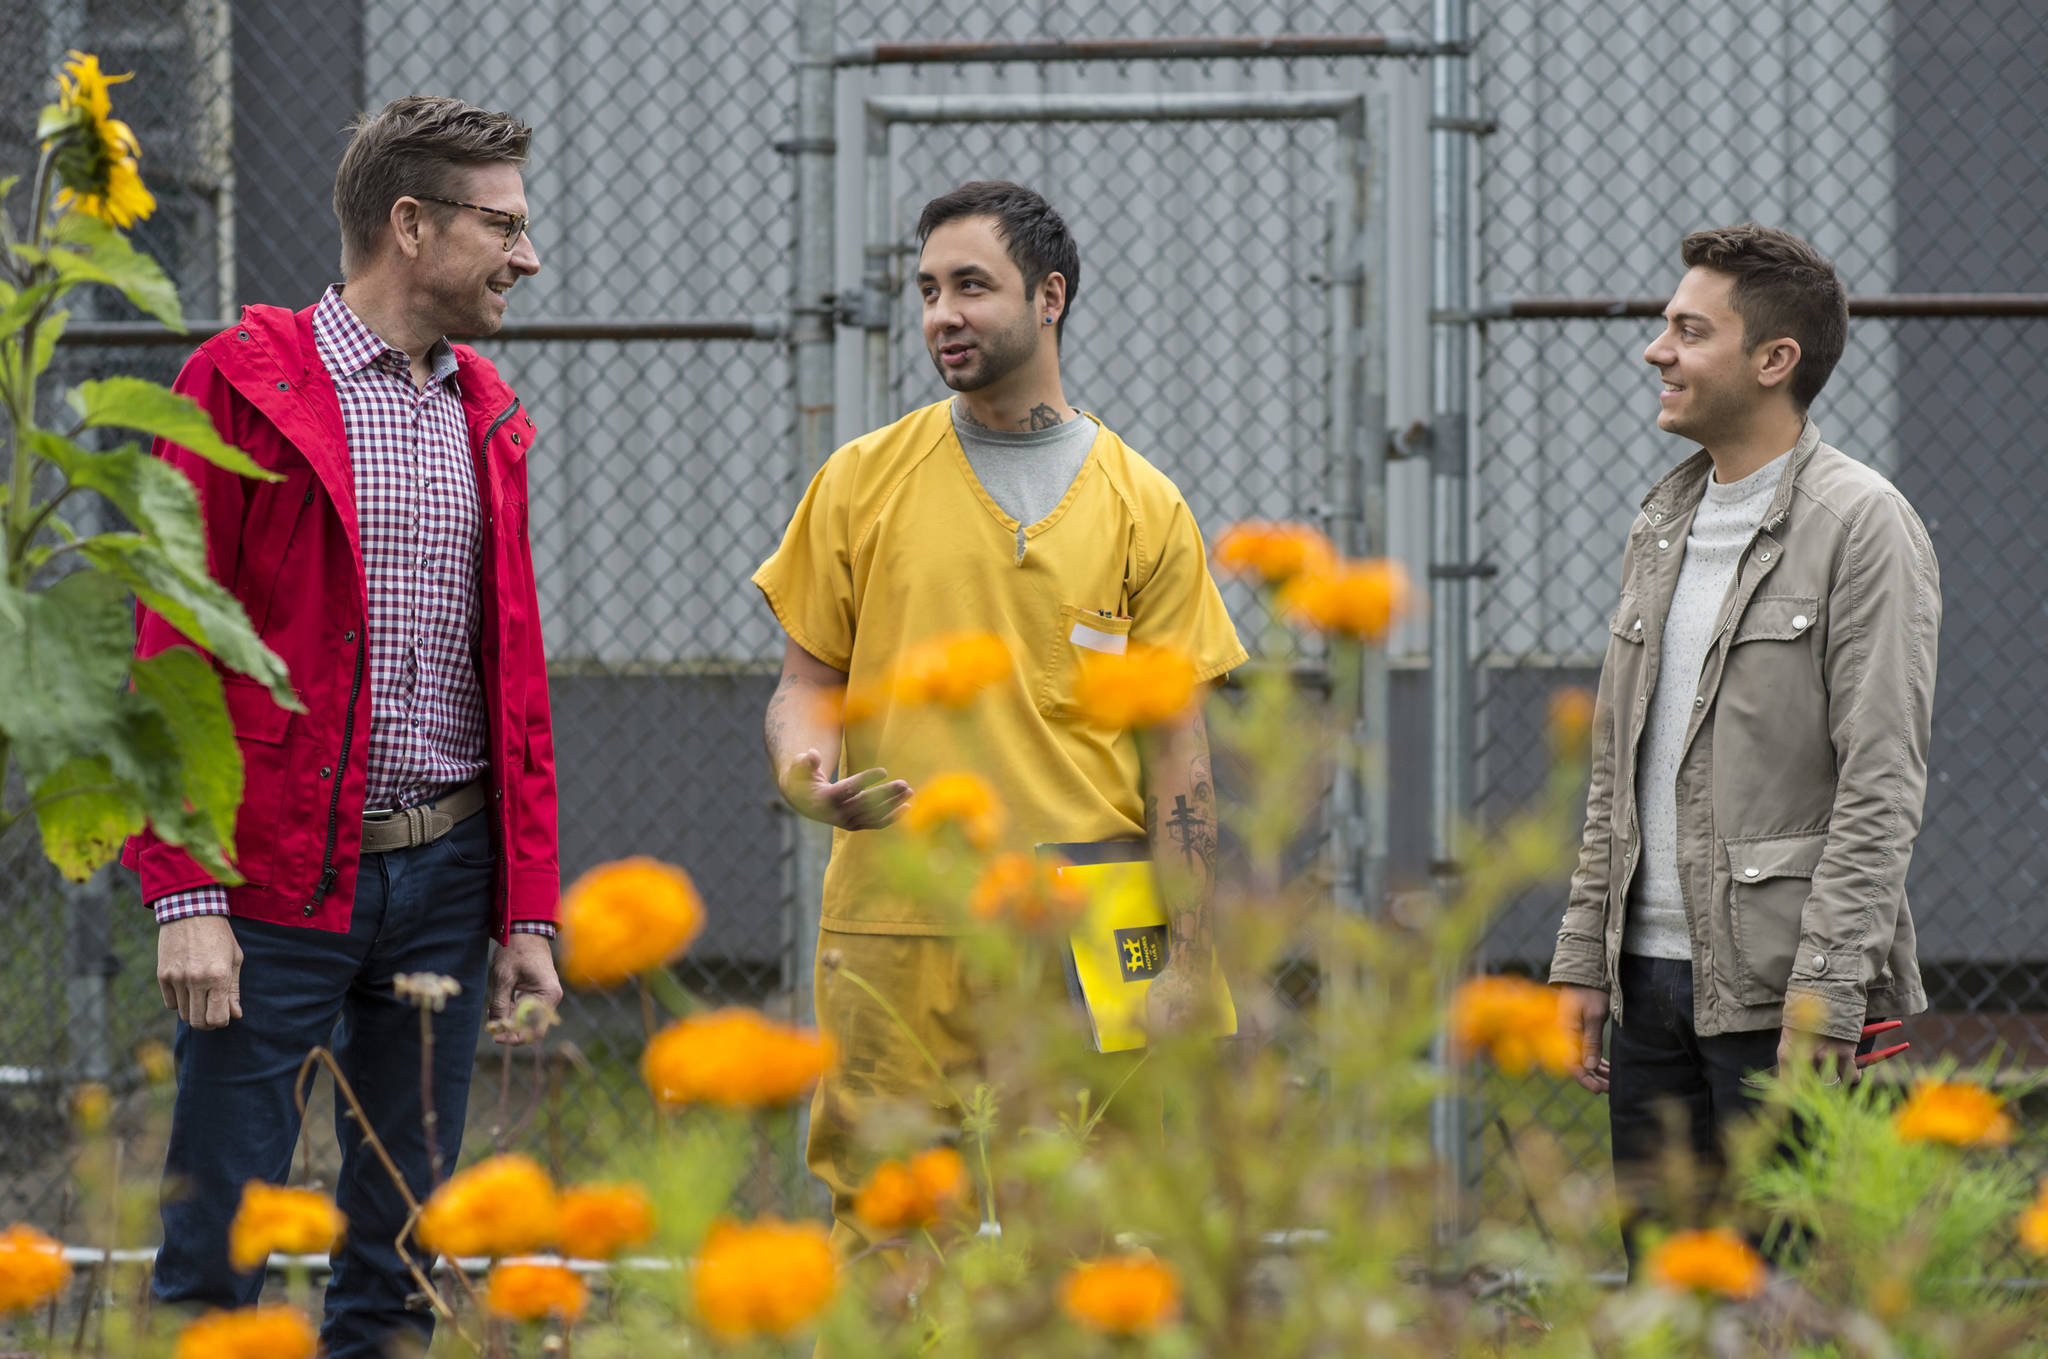 Jeremy Bauer, left, and Jason Clifton, right, of Frenchie’s Floral Studio, talk with inmate Patrick Sweeney about a flower-growing collaboration at Lemon Creek Correctional Center on Friday, Aug. 24, 2018. (Michael Penn | Juneau Empire)